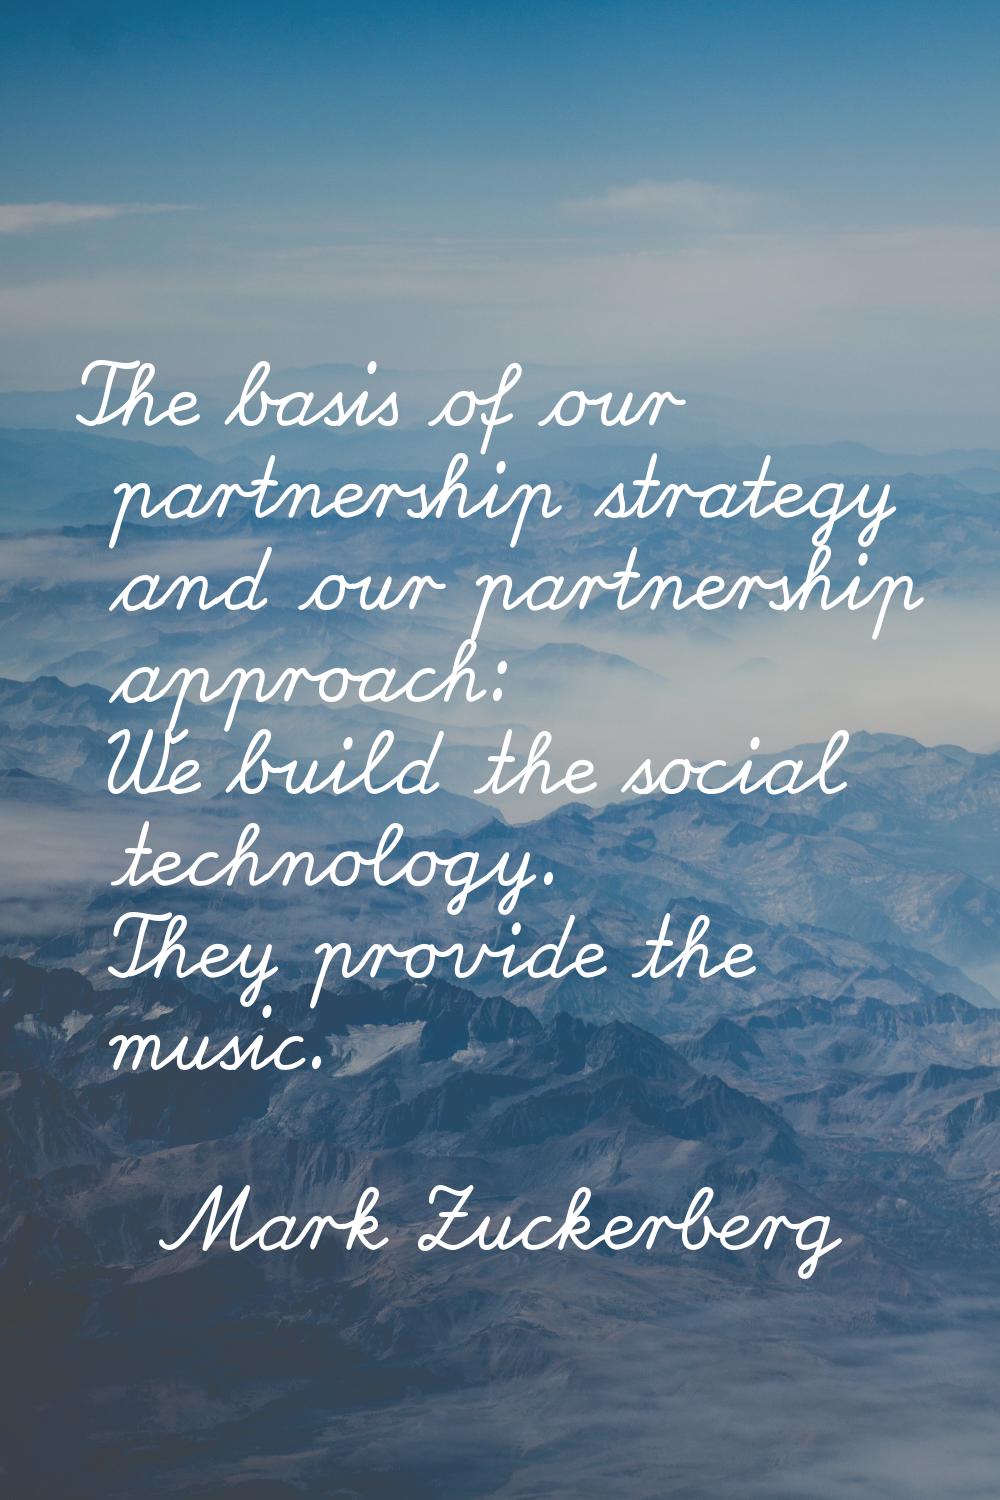 The basis of our partnership strategy and our partnership approach: We build the social technology.